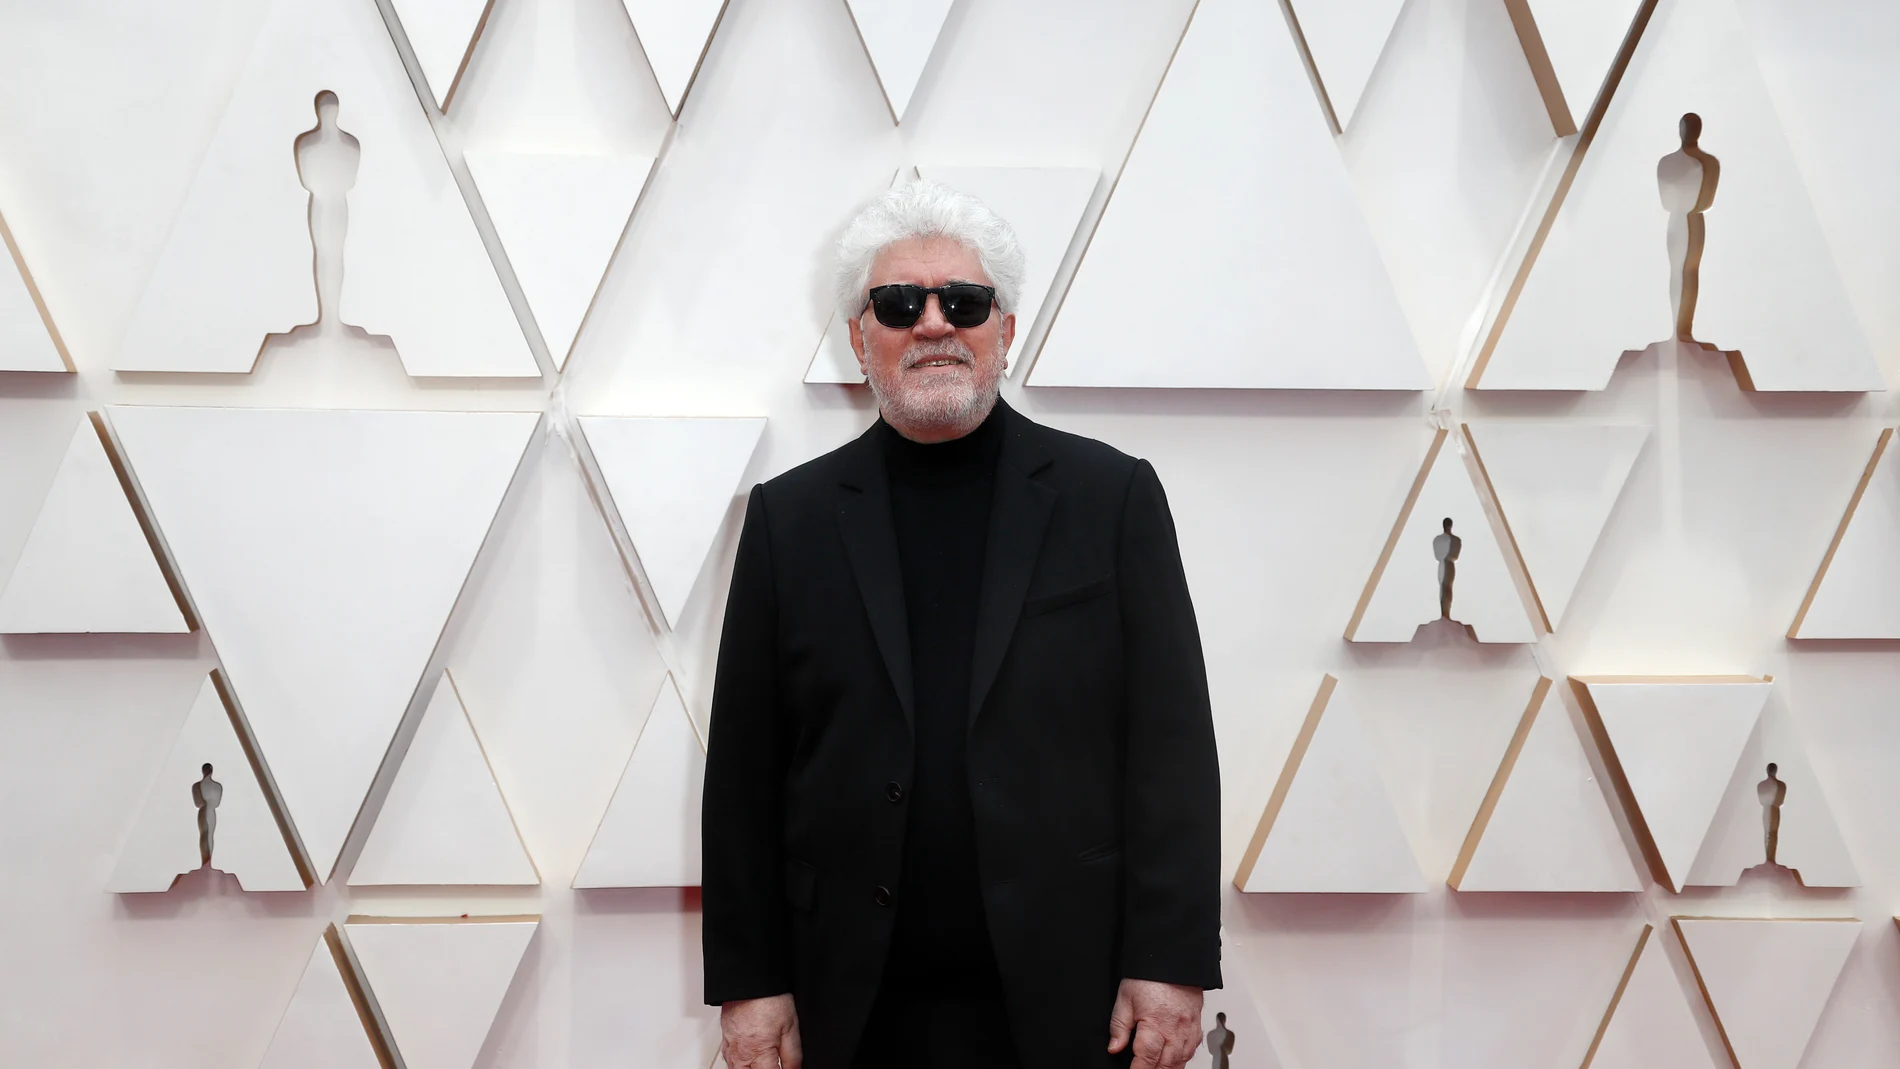 Pedro Almodovar poses on the red carpet during the Oscars arrivals at the 92nd Academy Awards in Hollywood, Los Angeles, California, U.S., February 9, 2020. REUTERS/Eric Gaillard